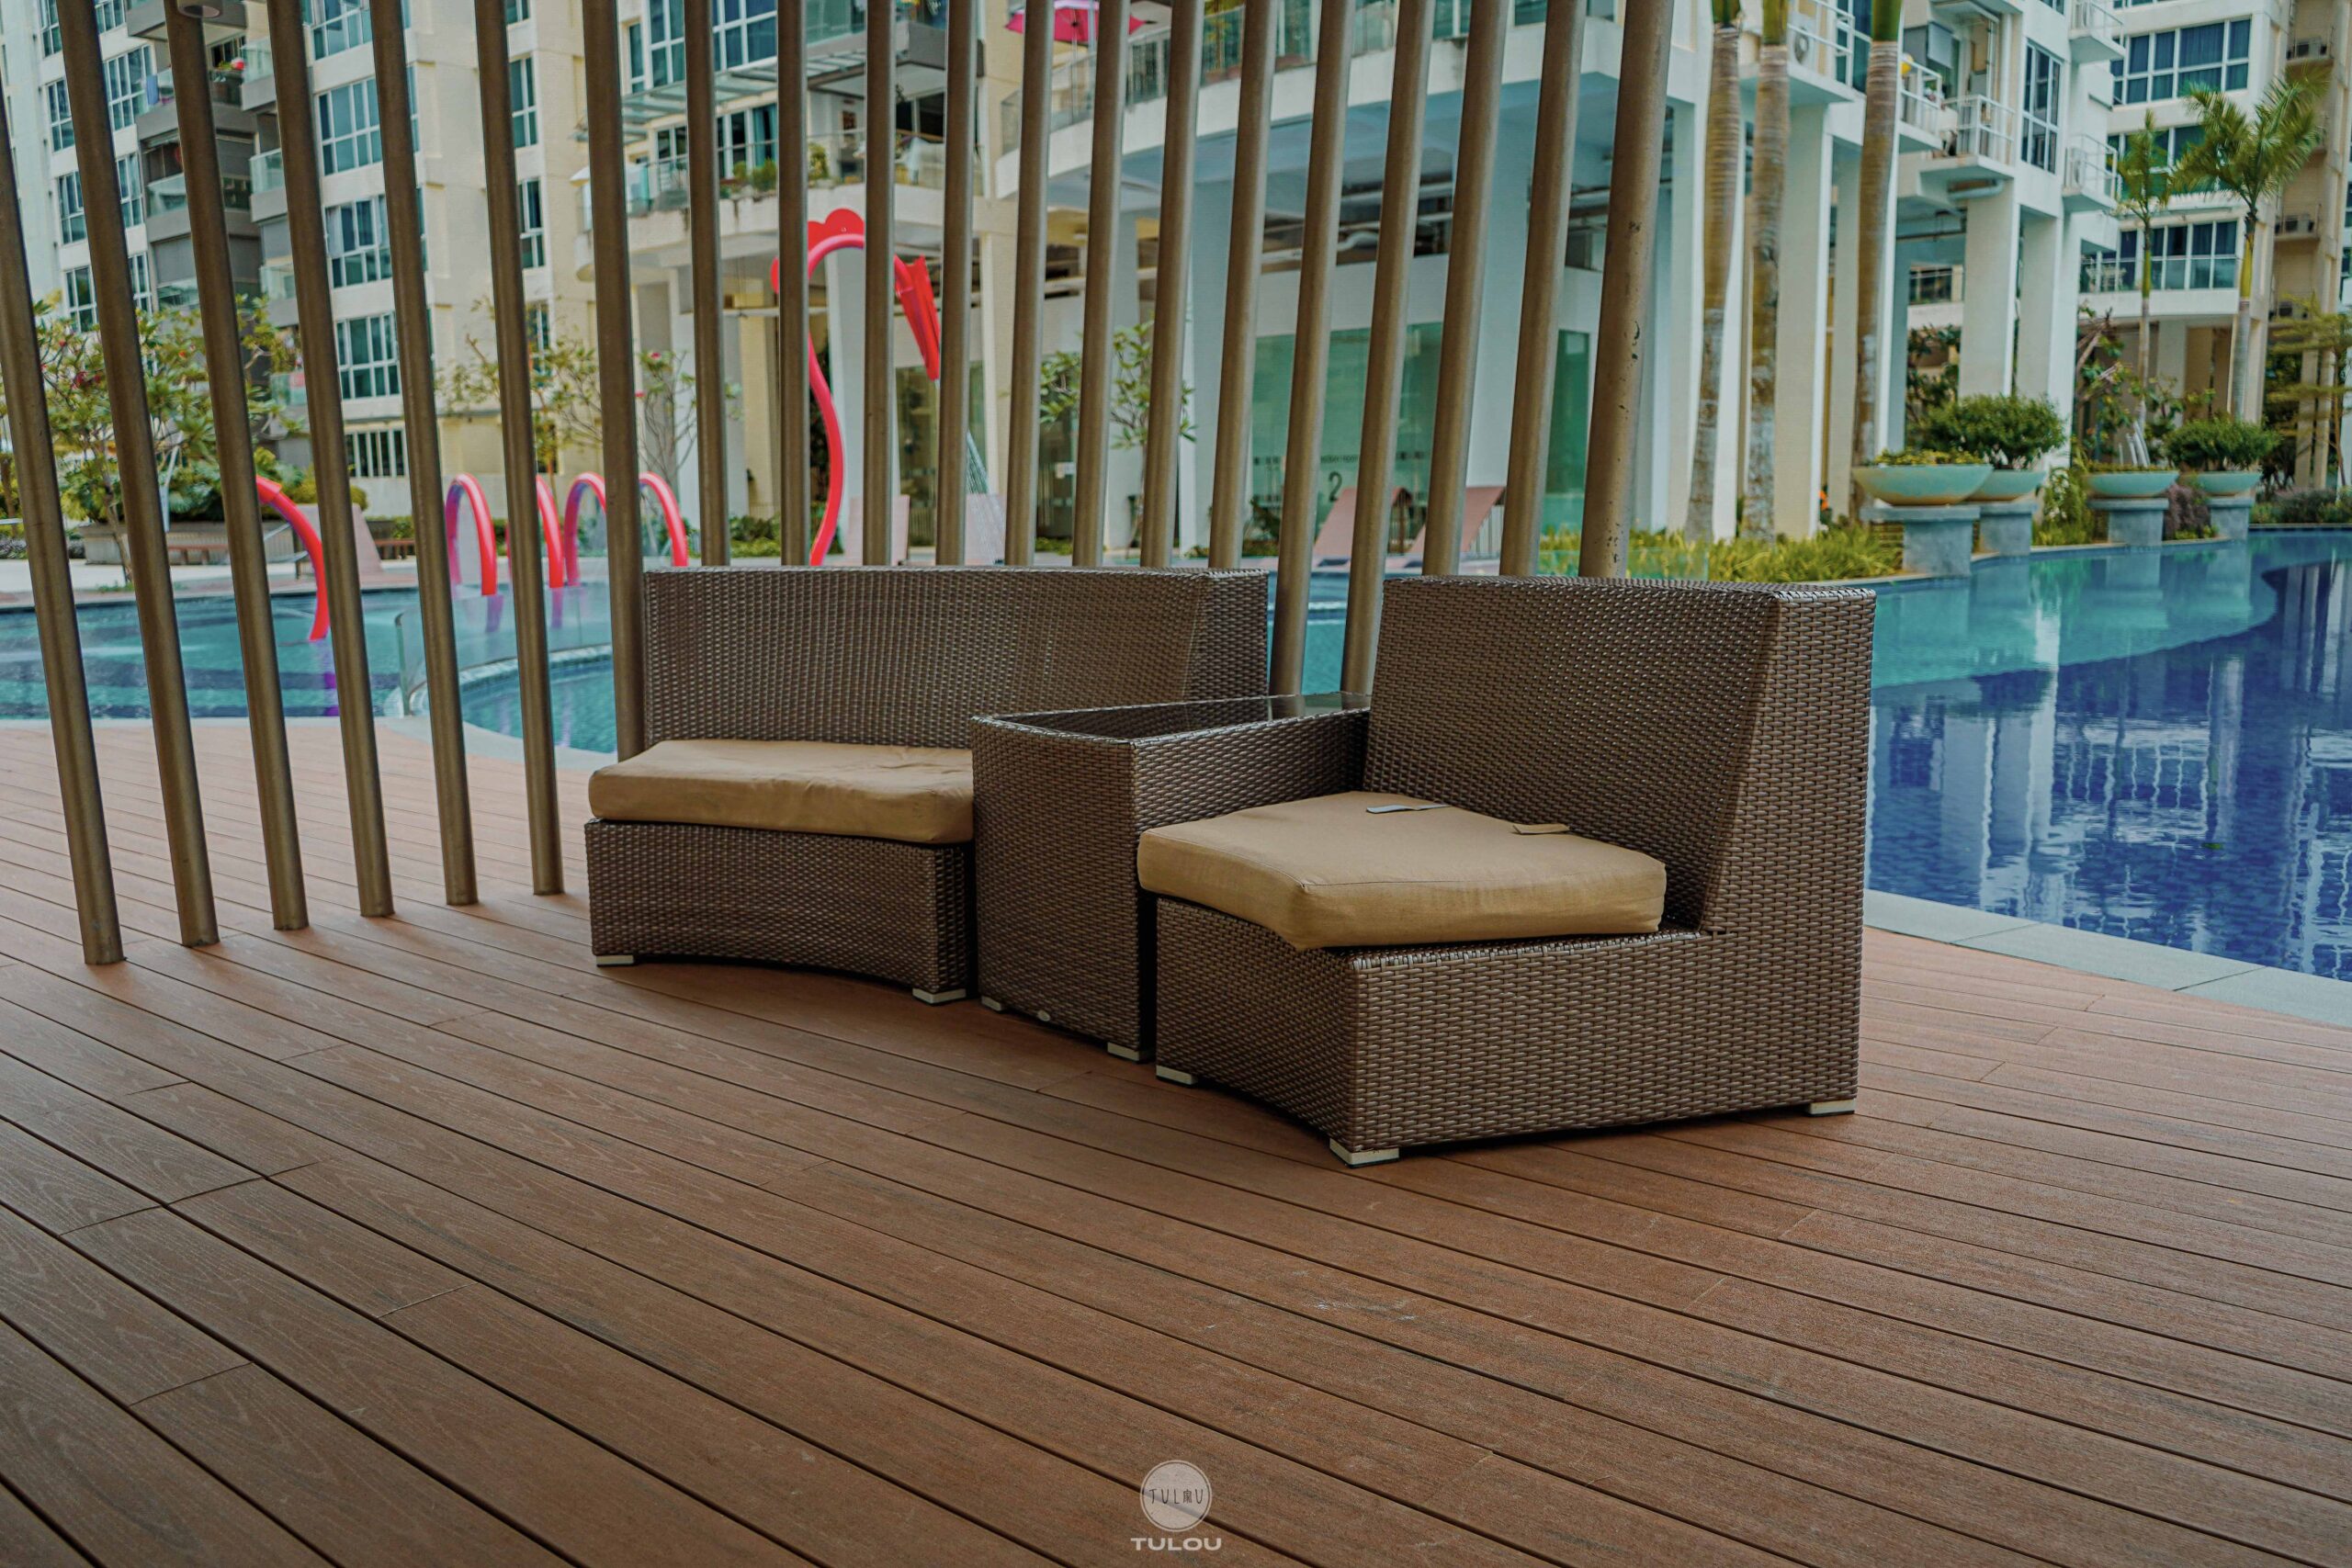 Tulou Composite Timber Decking Singapore Tampines Trilliant 3 scaled - The Tampines Trilliant